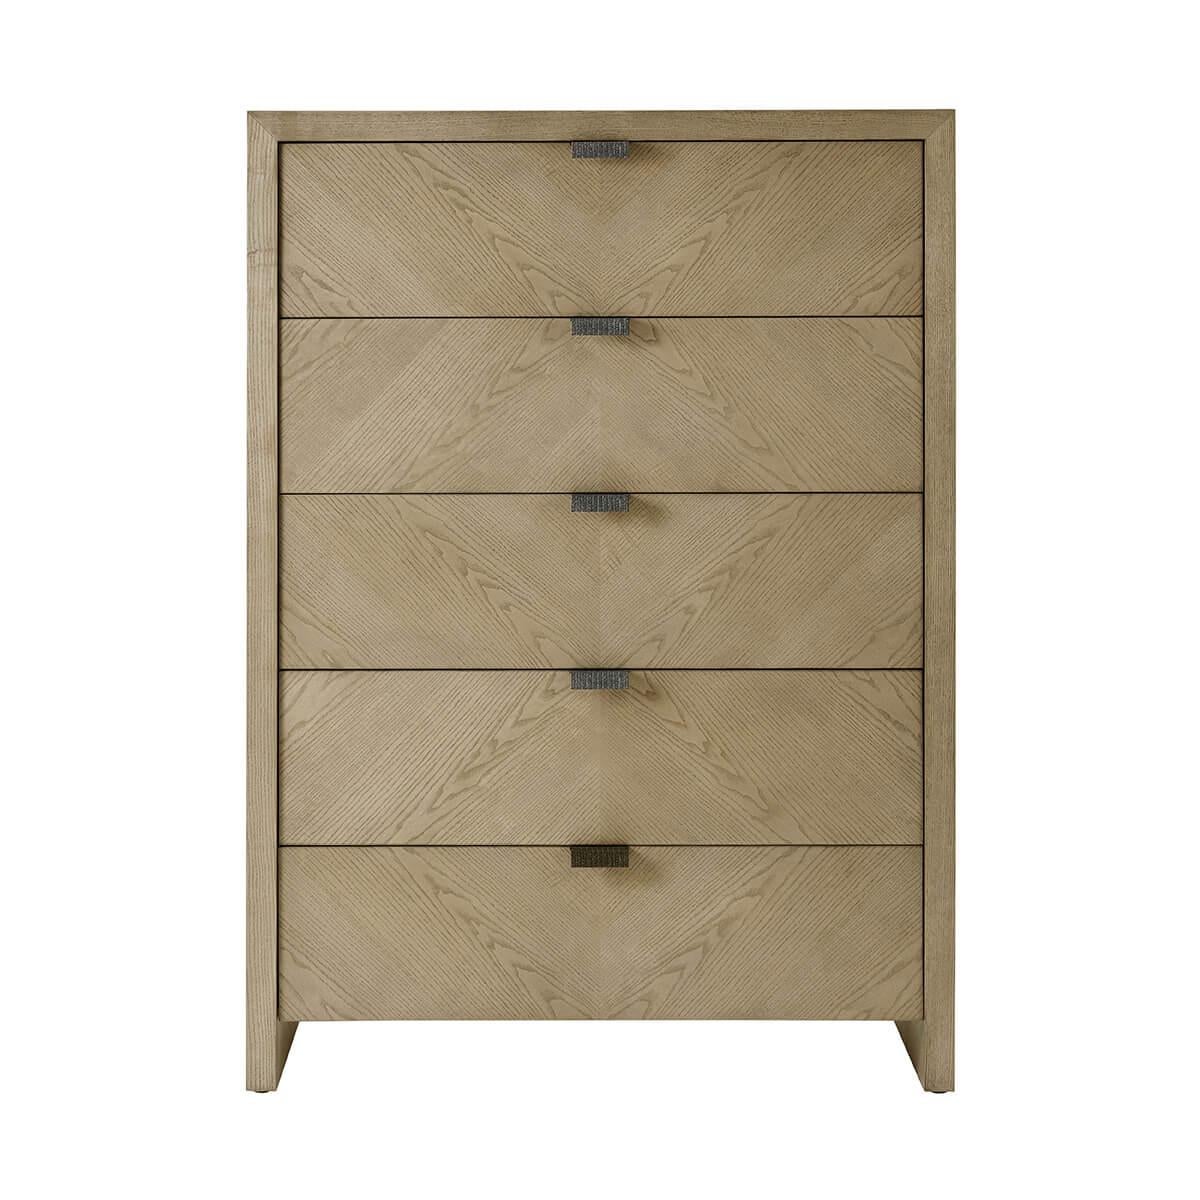 A handsome five-drawer tall bedroom chest made of figured ash in light Dune finish with textured metal pulls in our Ember finish and soft close drawers.

Dimensions: 40